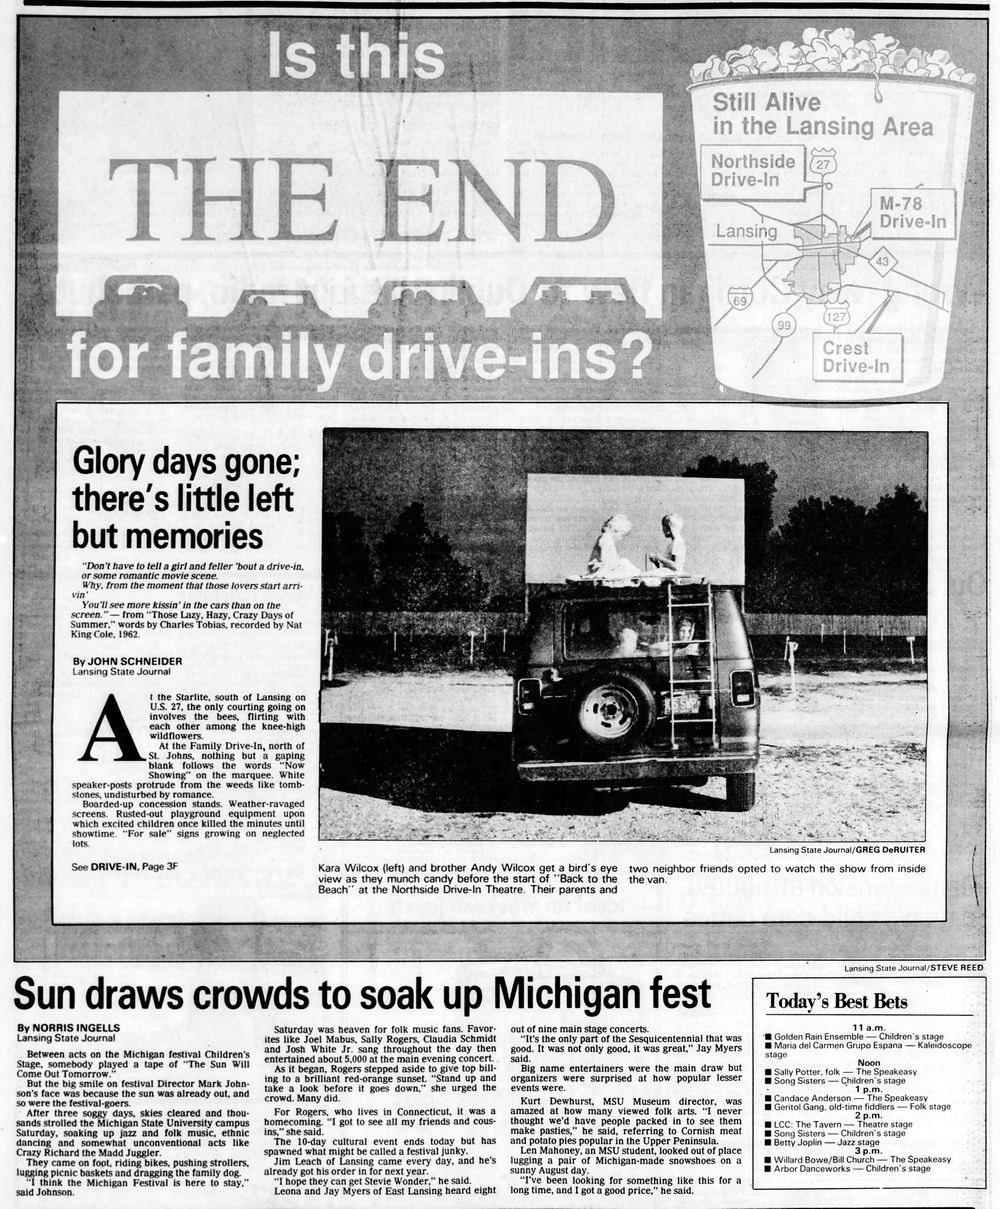 Family Drive-In Theatre - Aug 30 1987 Article On Closing Of Drive-Ins